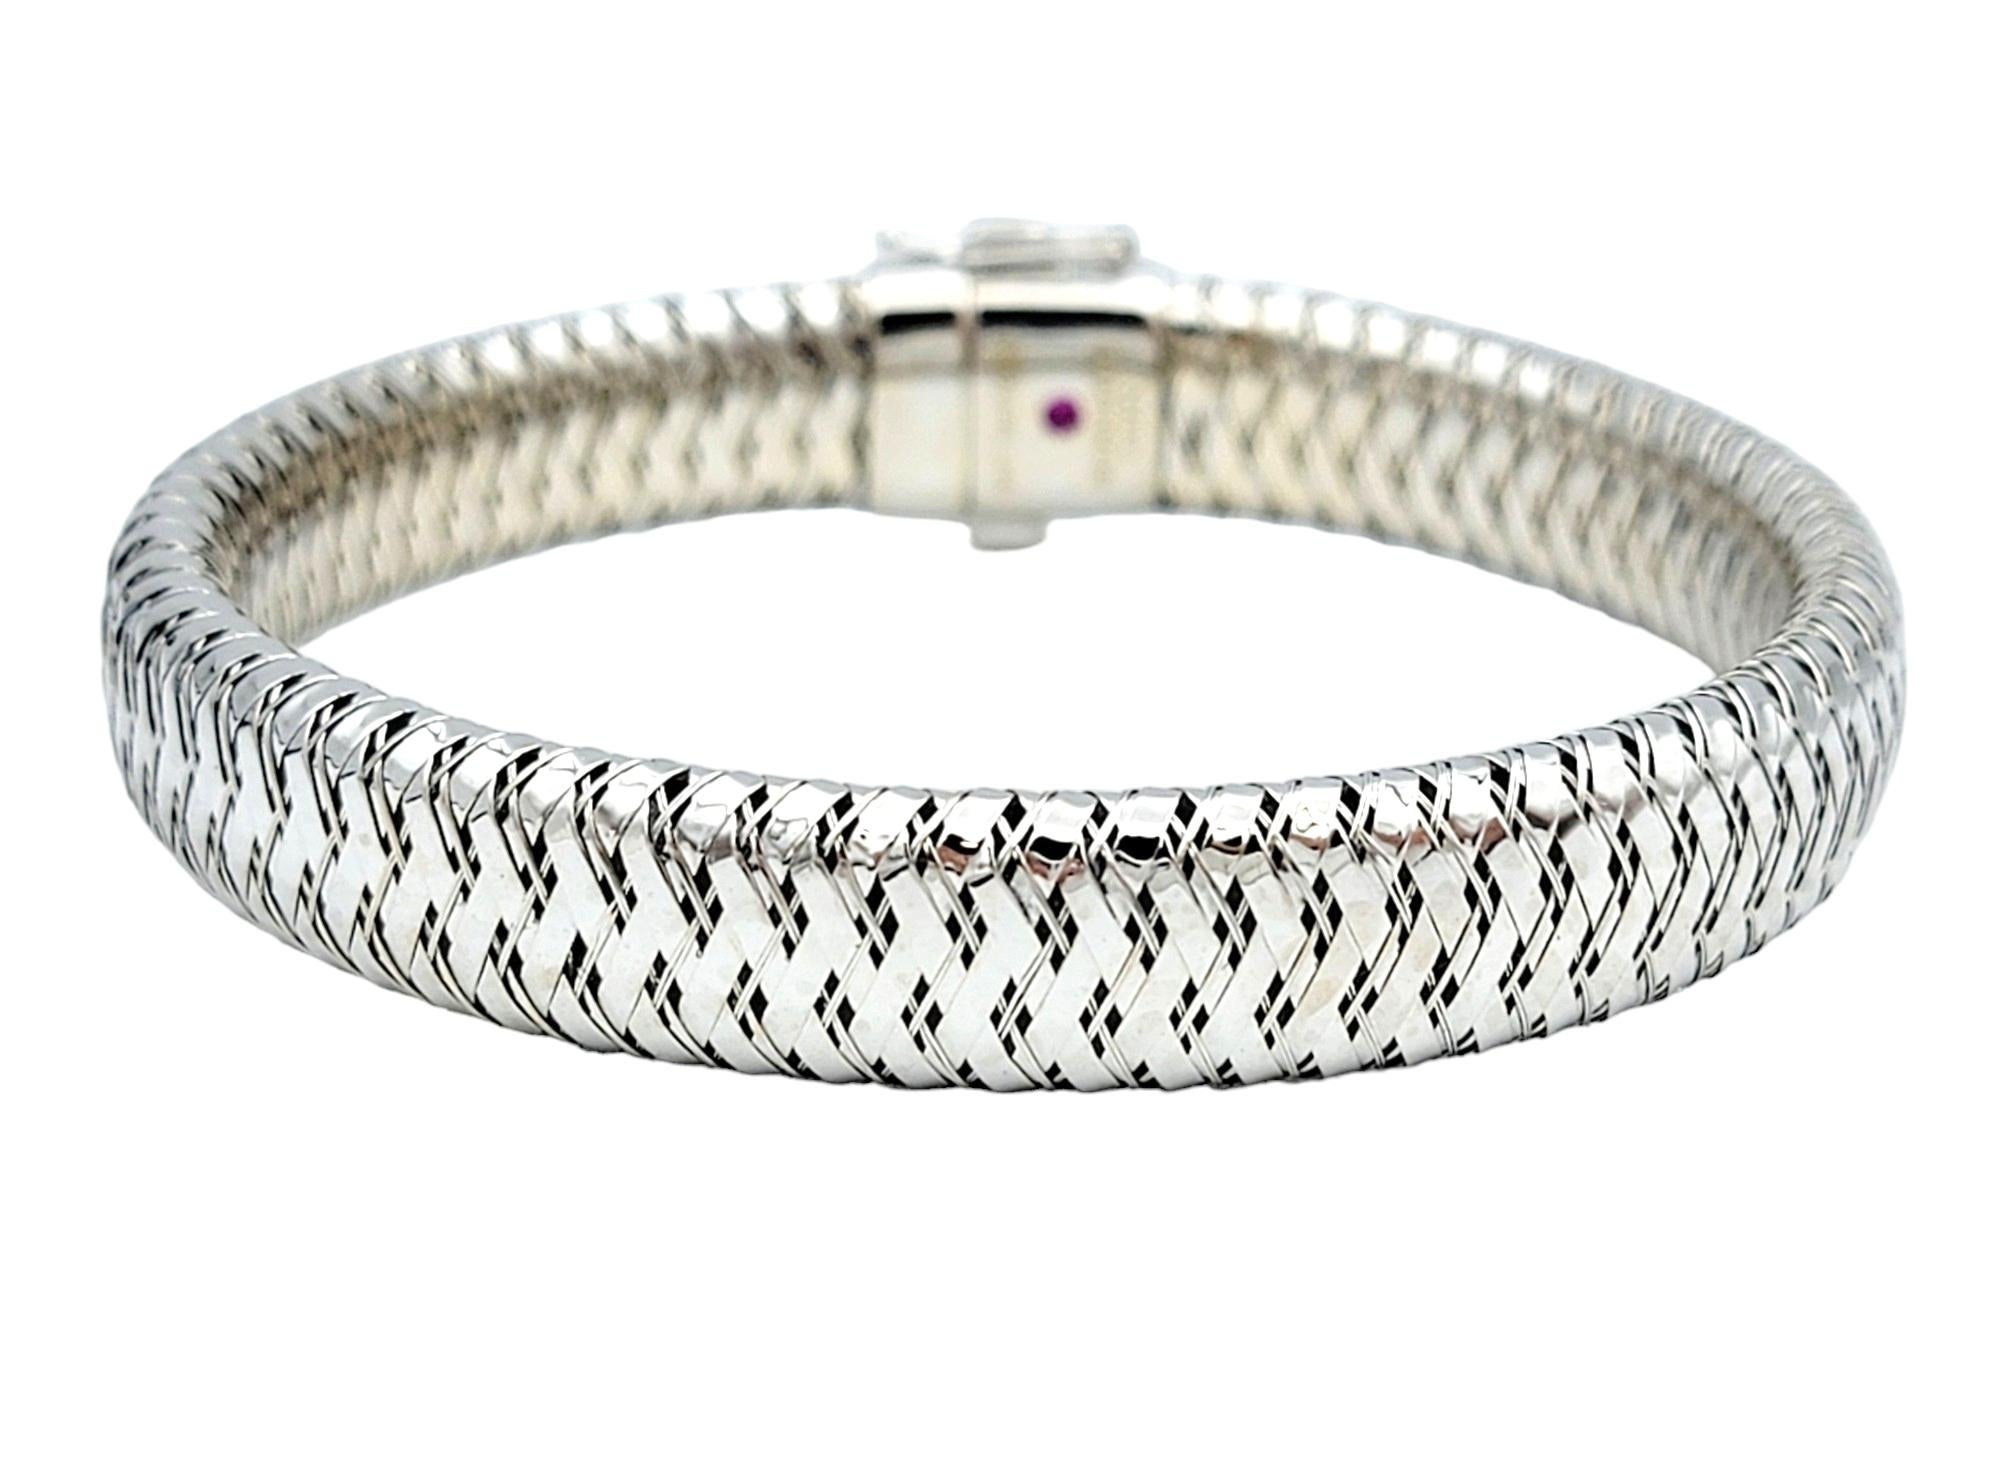 The inner circumference of this bracelet measures 6.38 inches and will comfortably fit up to a 6.25 inch wrist. 

The Roberto Coin Primavera flex bangle bracelet is a stunning piece crafted from luxurious 18 karat white gold. Its flexible design